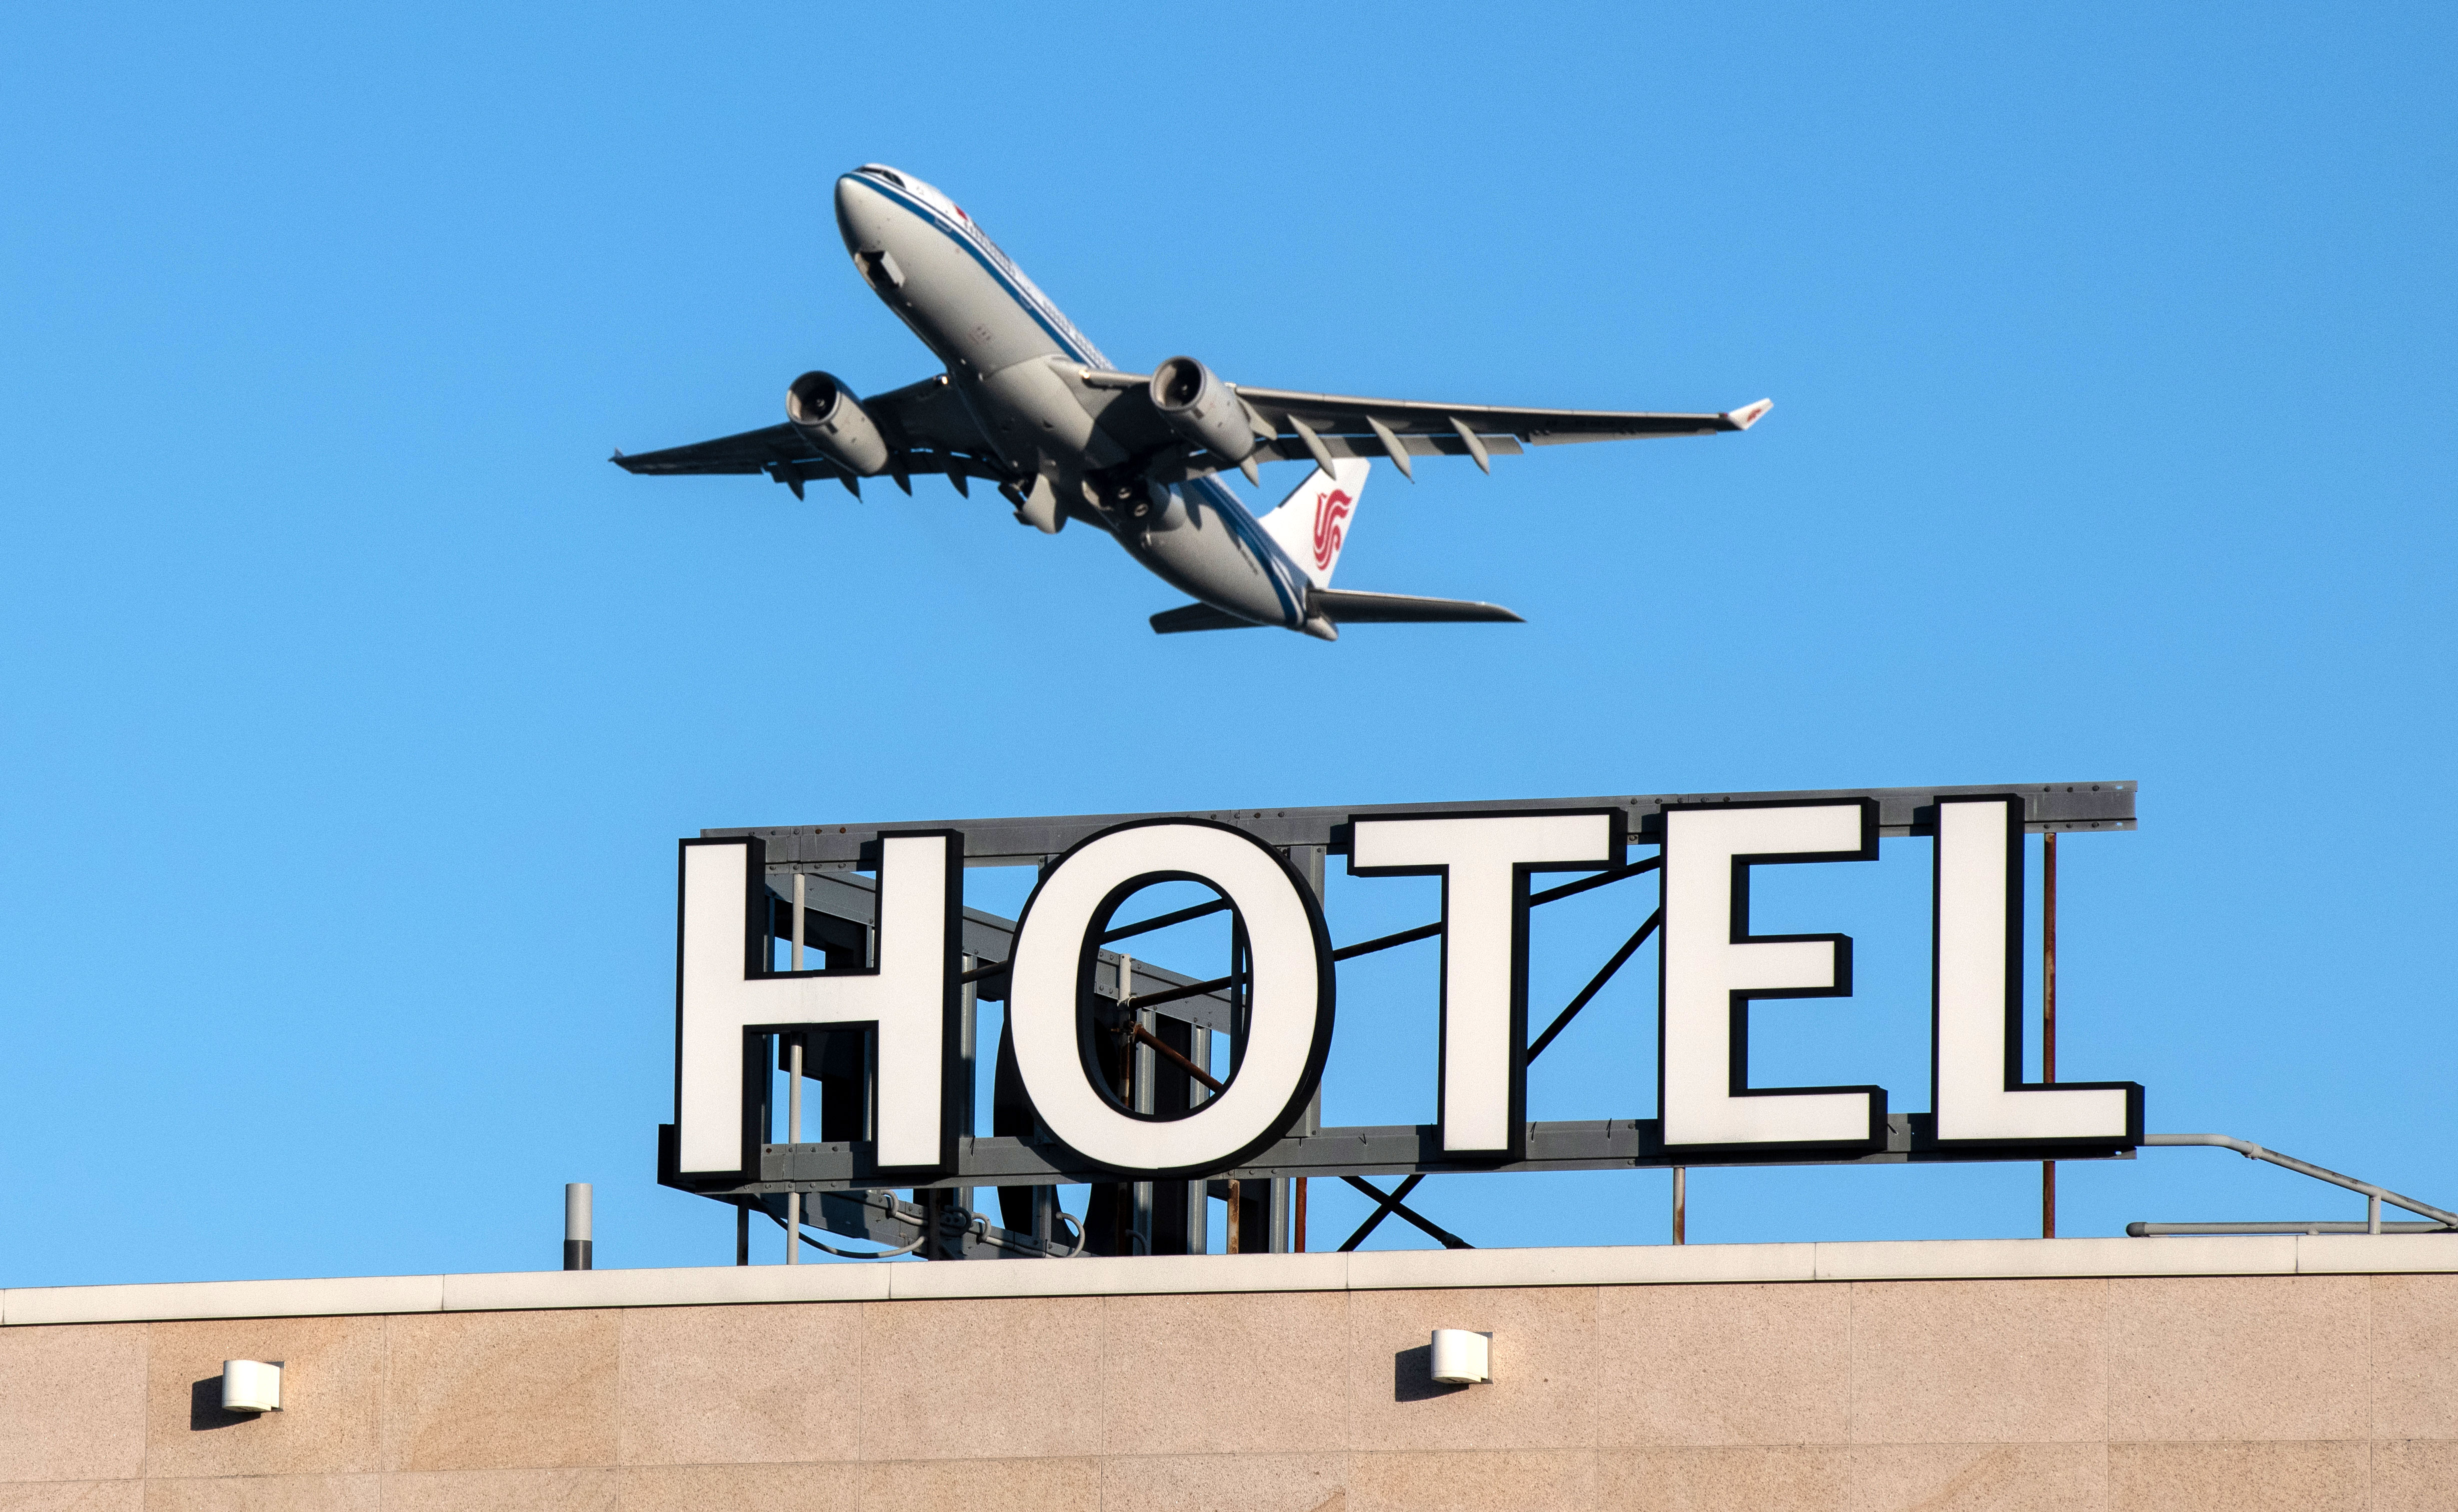 An airplane passes over a hotel as it takes off from Heathrow Airport in London on January 25.